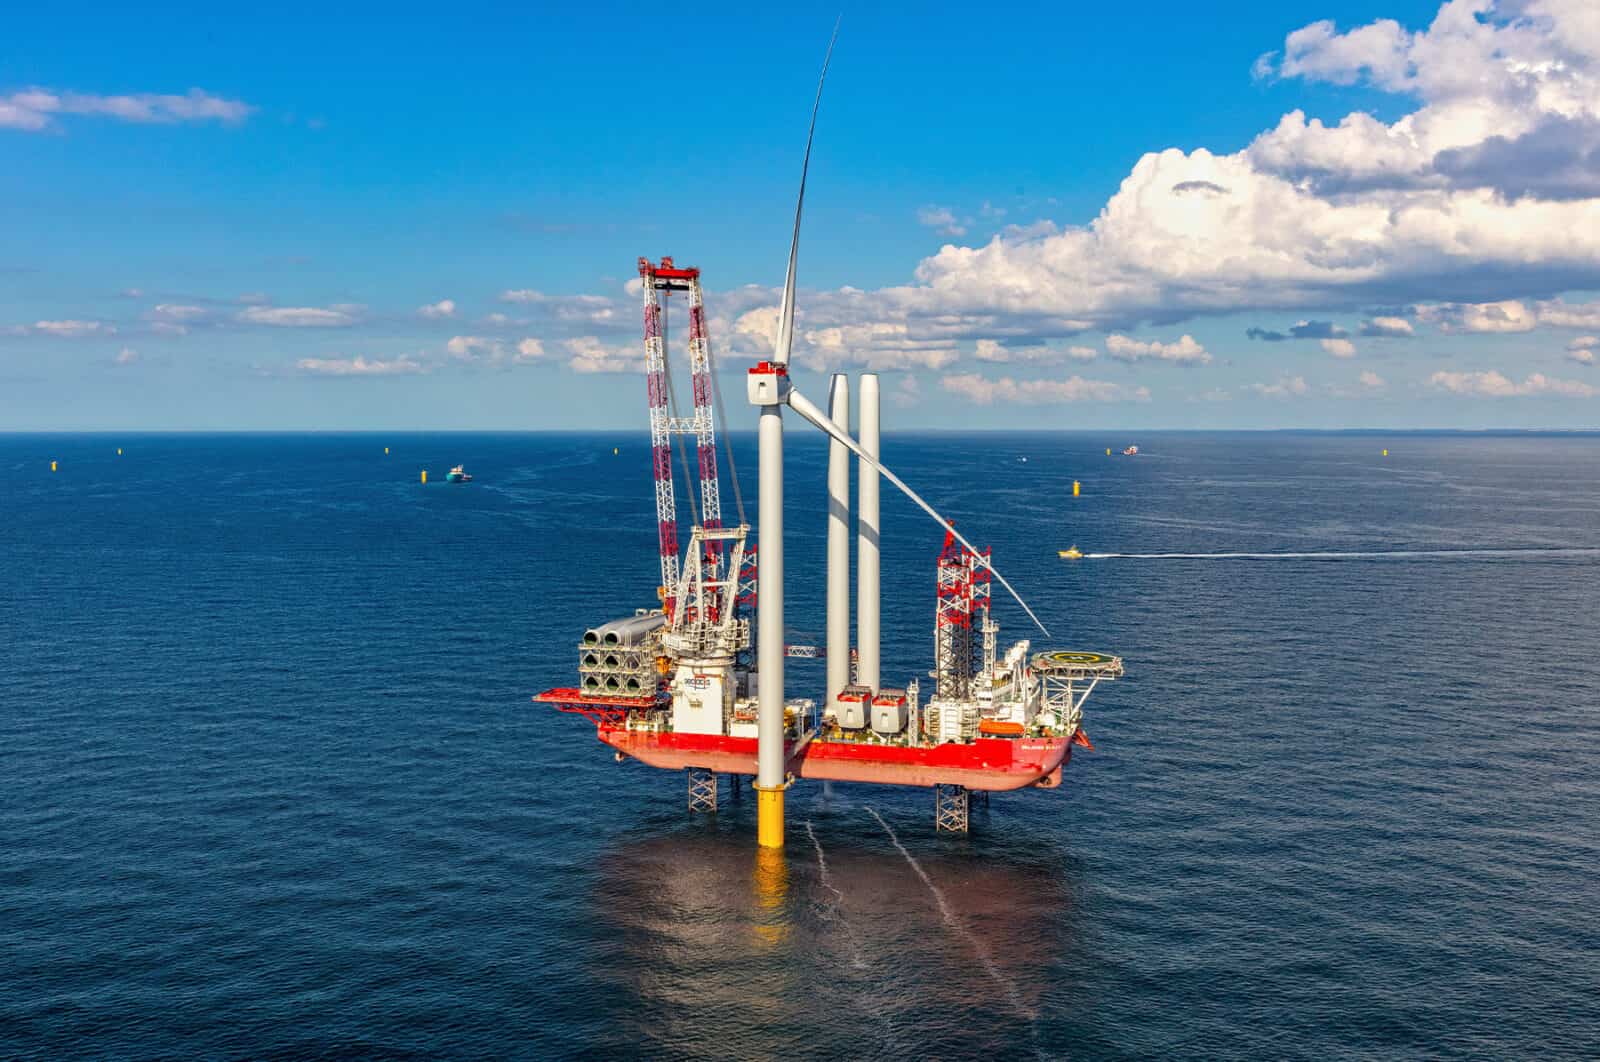 First turbine rises at Hollandse Kust Noord offshore wind park - 68 more to follow